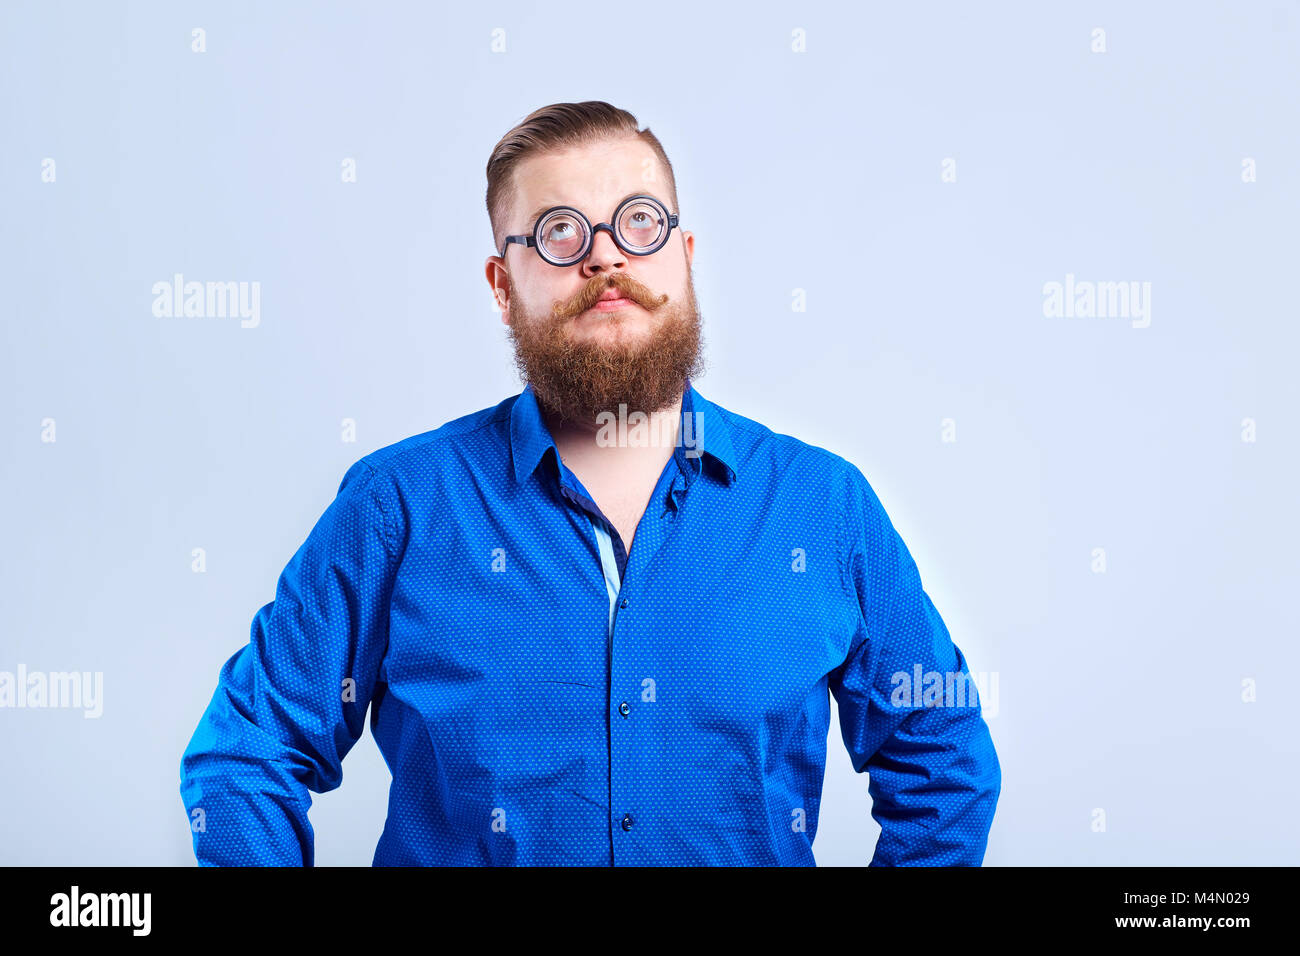 A fat, bearded man clever with glasses with a clever stupid expr Stock Photo